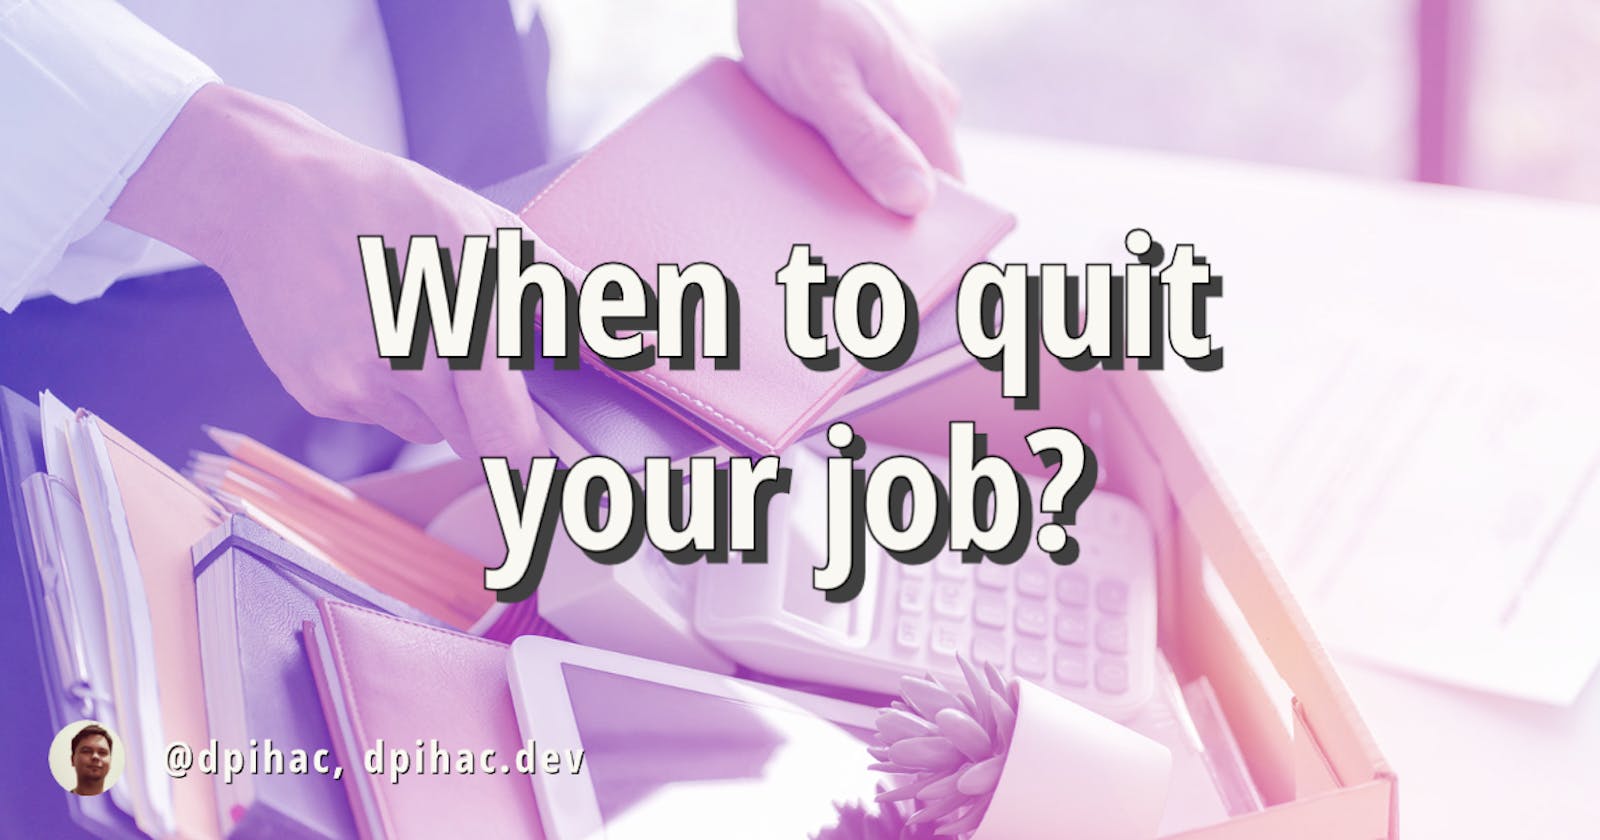 When to quit your job?